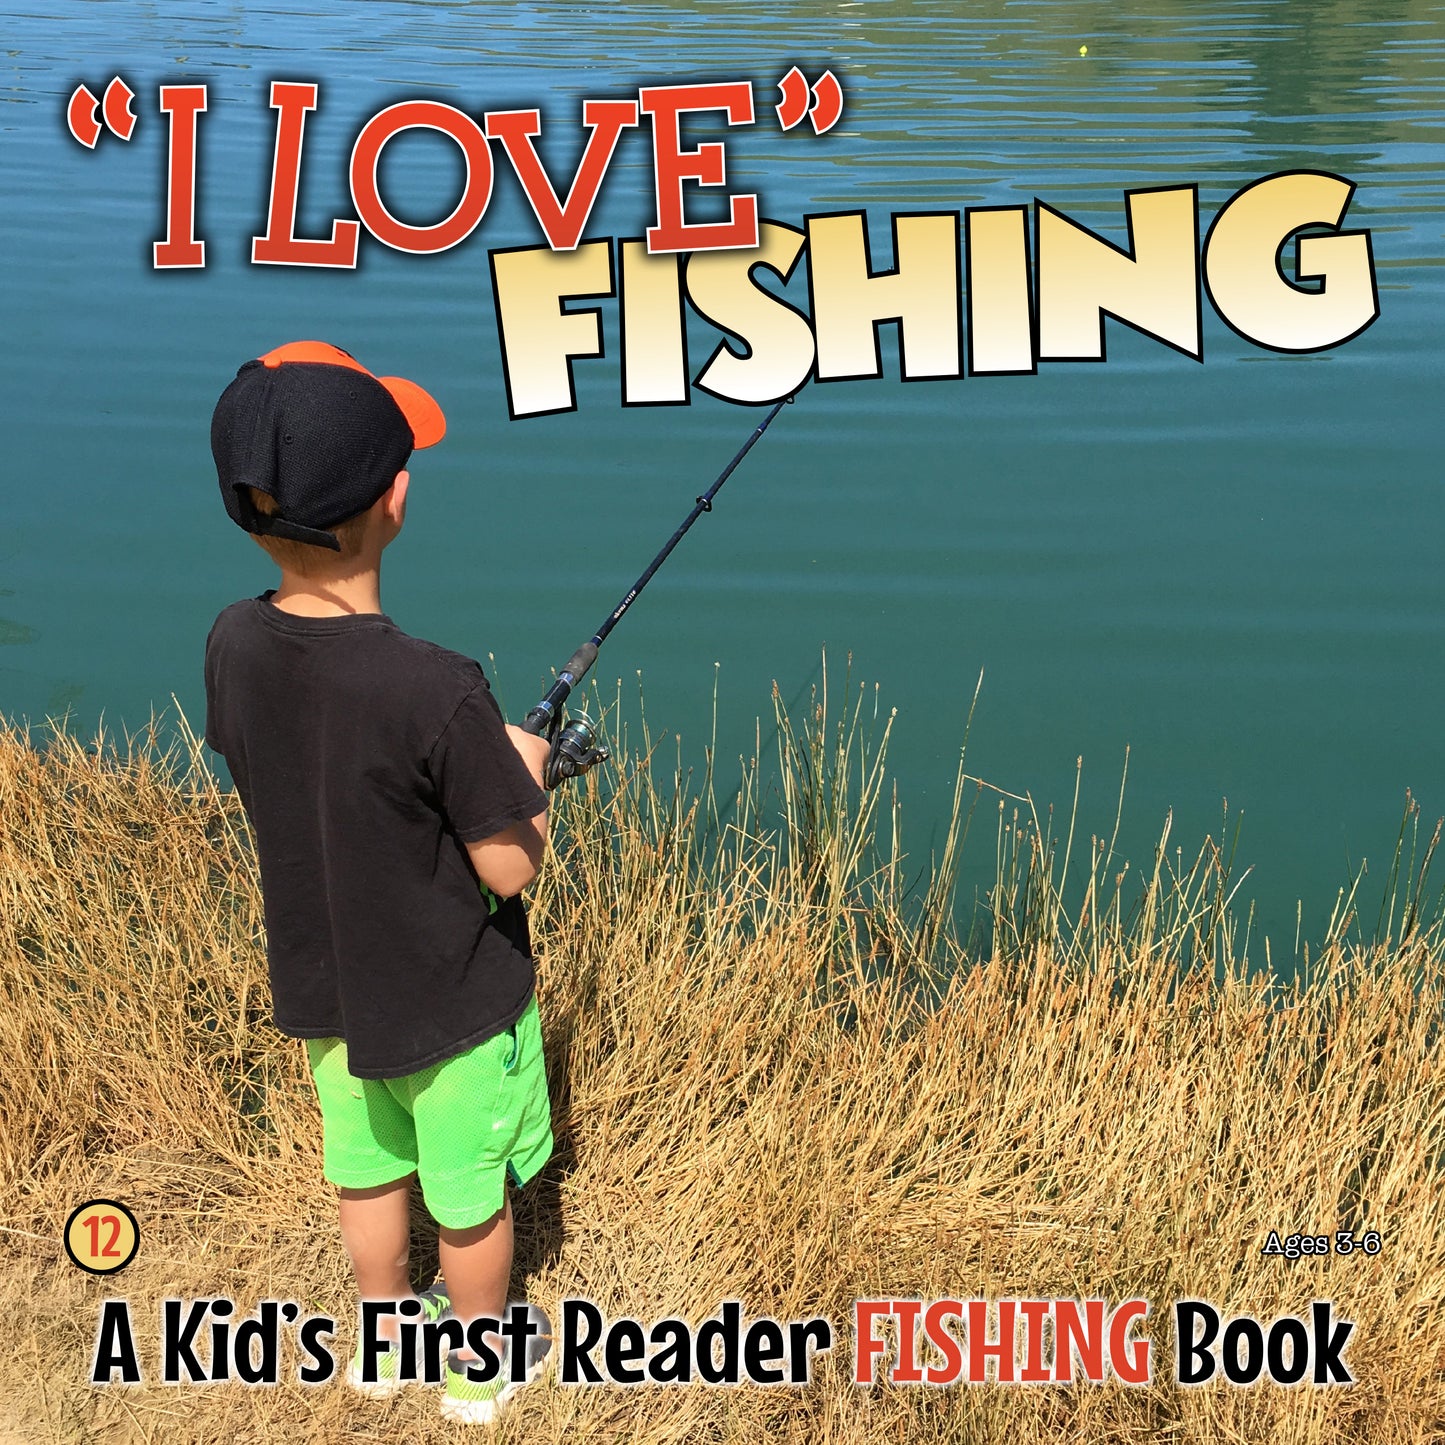 I Love 'Fishing' - A Kids First Reader Fishing Book